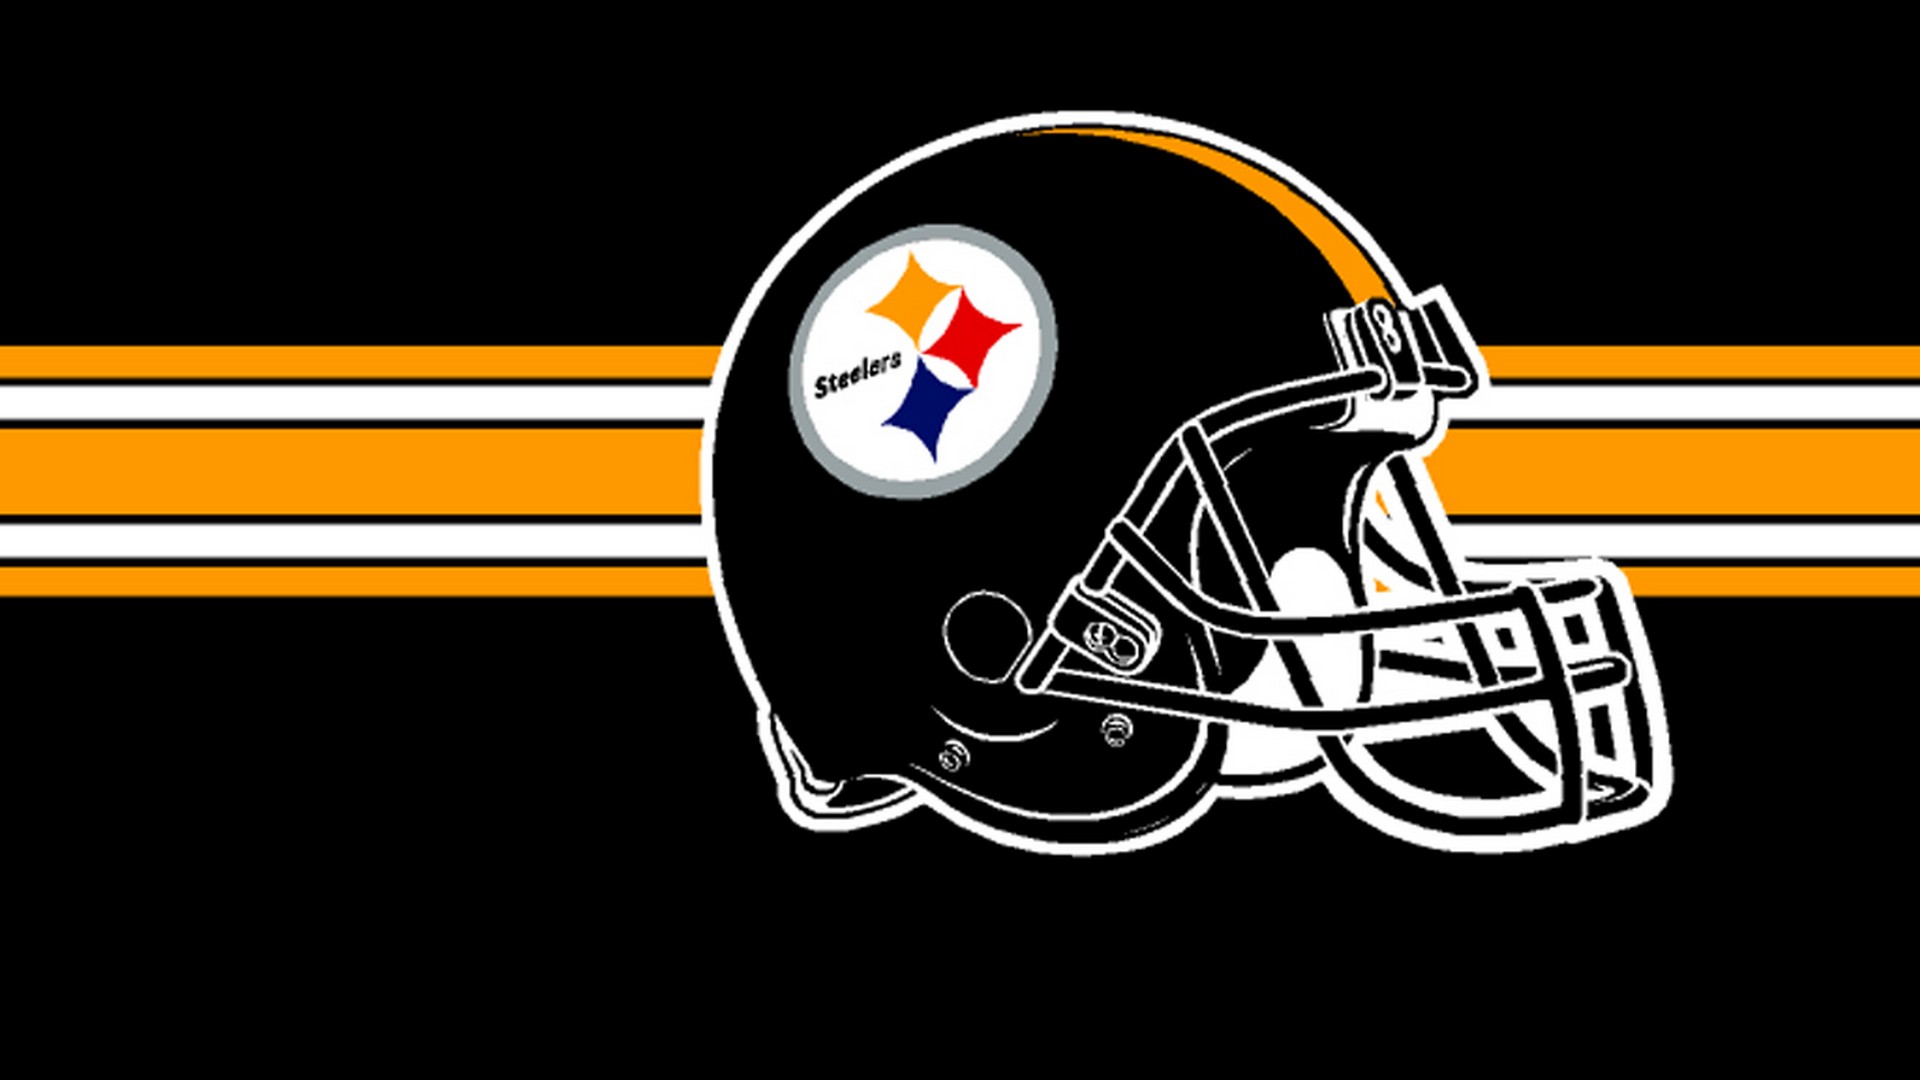 Steelers Football Wallpaper For Mac Backgrounds with resolution 1920x1080 pixel. You can make this wallpaper for your Mac or Windows Desktop Background, iPhone, Android or Tablet and another Smartphone device